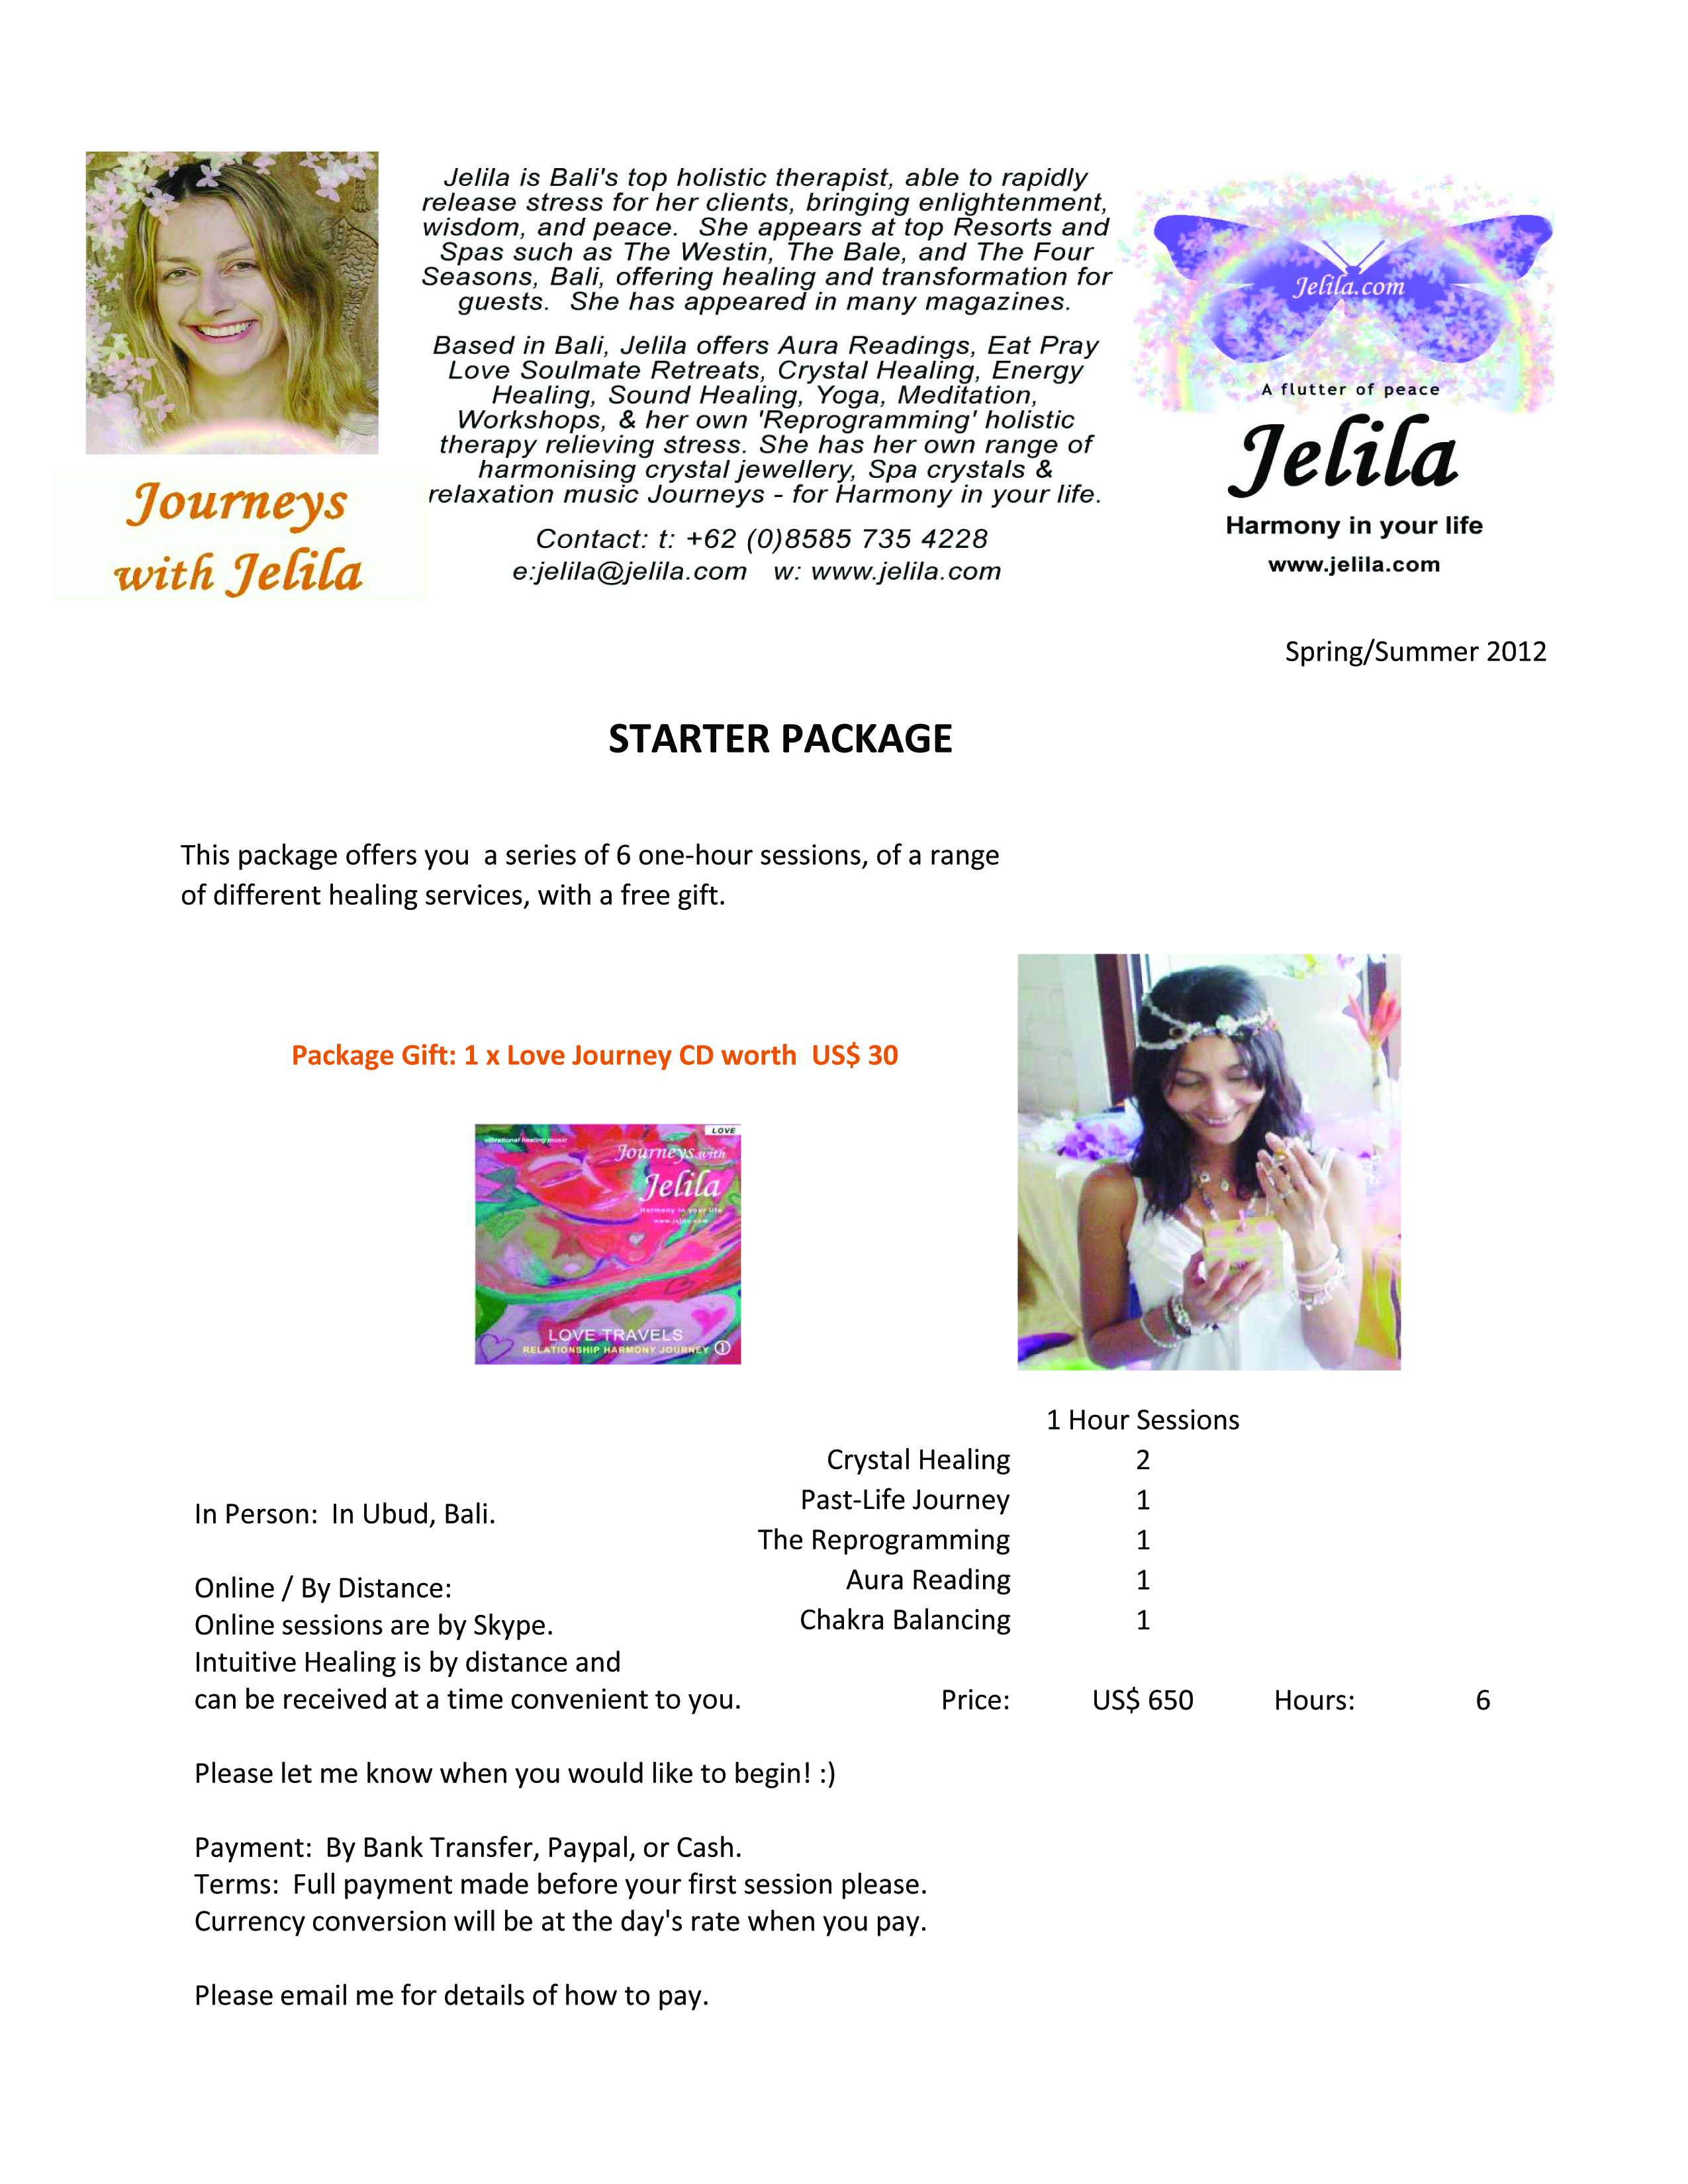 Jelila - Starter Package - 6 Mixed Sessions, 6 Hours, US$ 650 jpg - Online Healing Transformation Therapy with Jelila - www.jelila.com